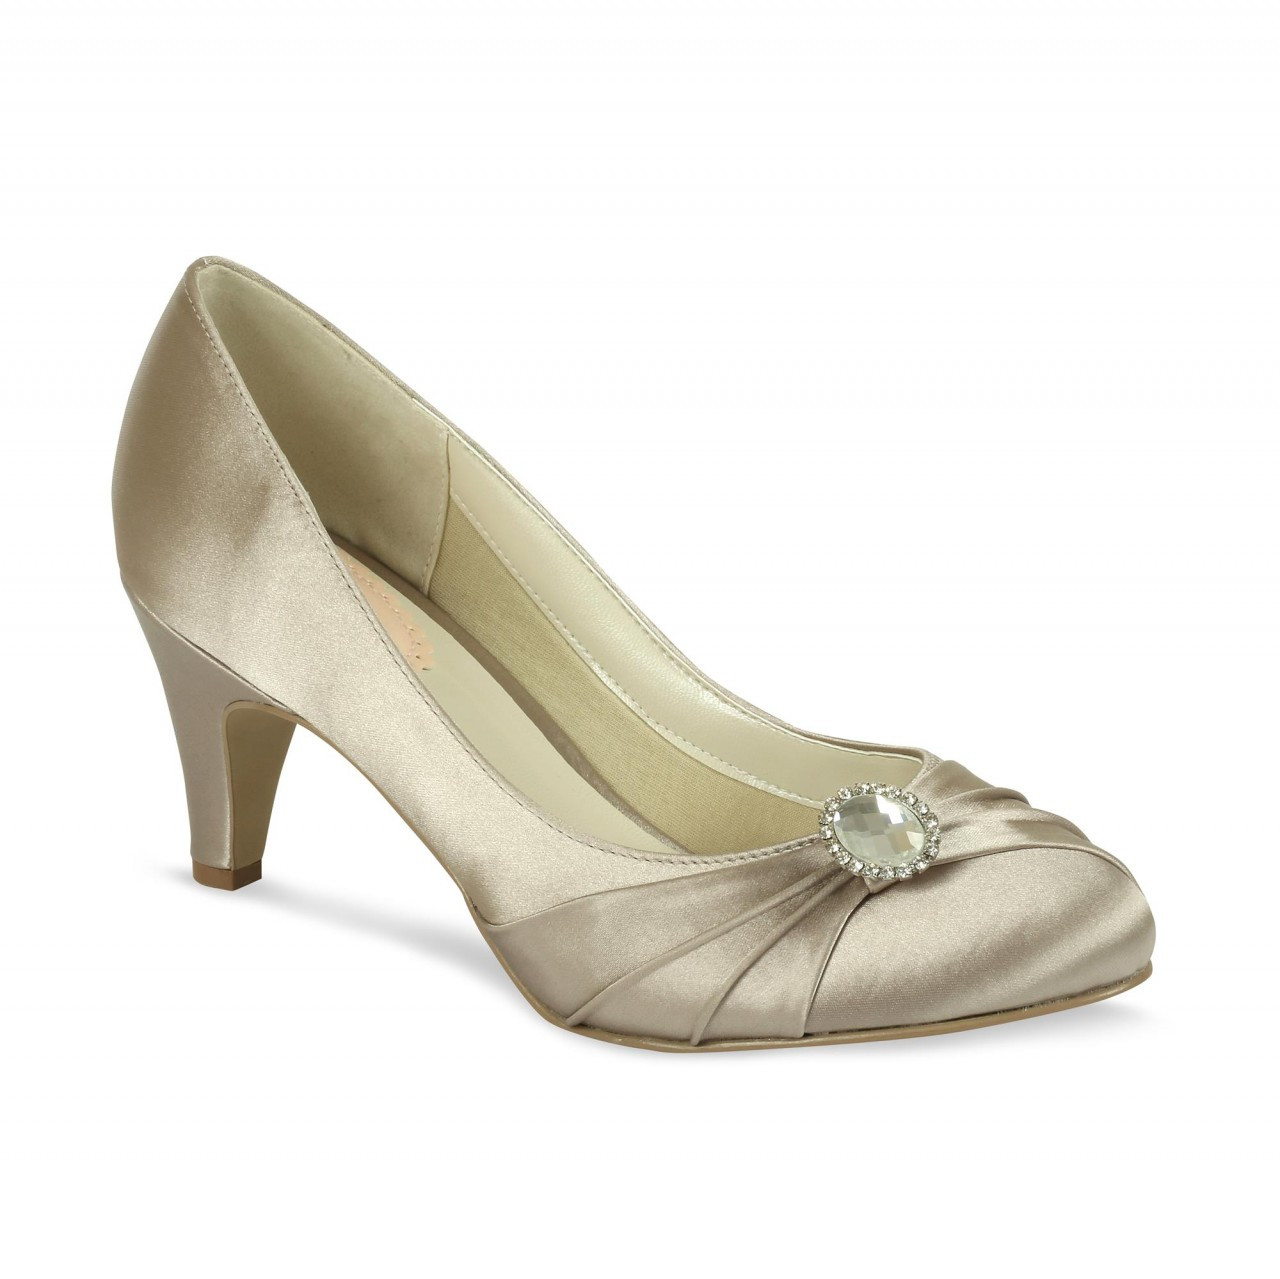 Taupe Shoes For Wedding
 Taupe Wedding Shoes Shoe Dyeing Service